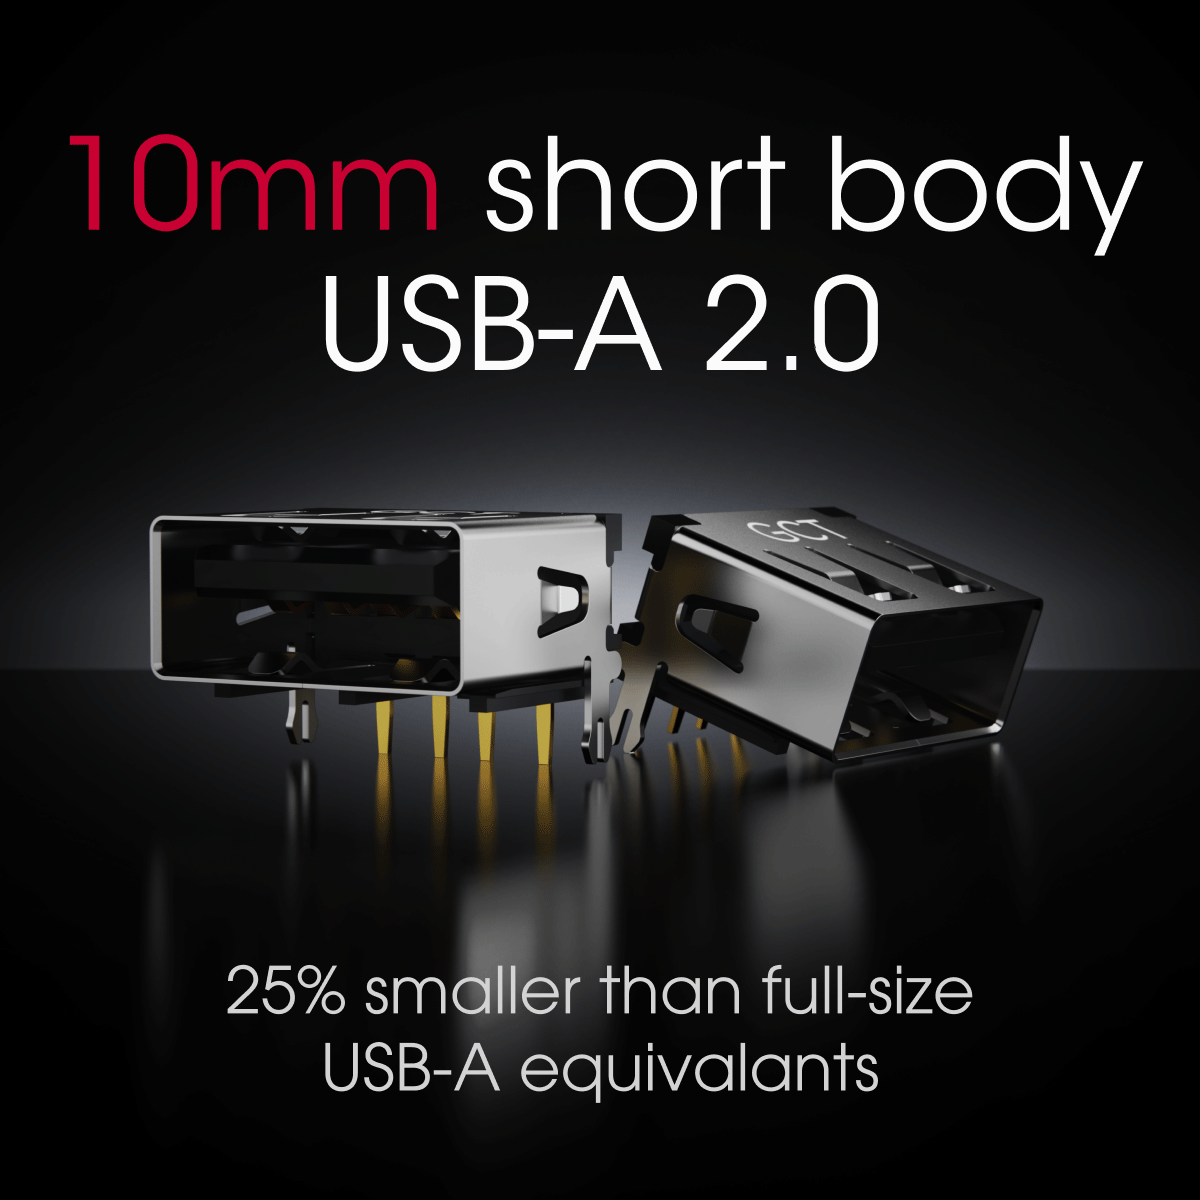 Short Body USB A with Extended Performance